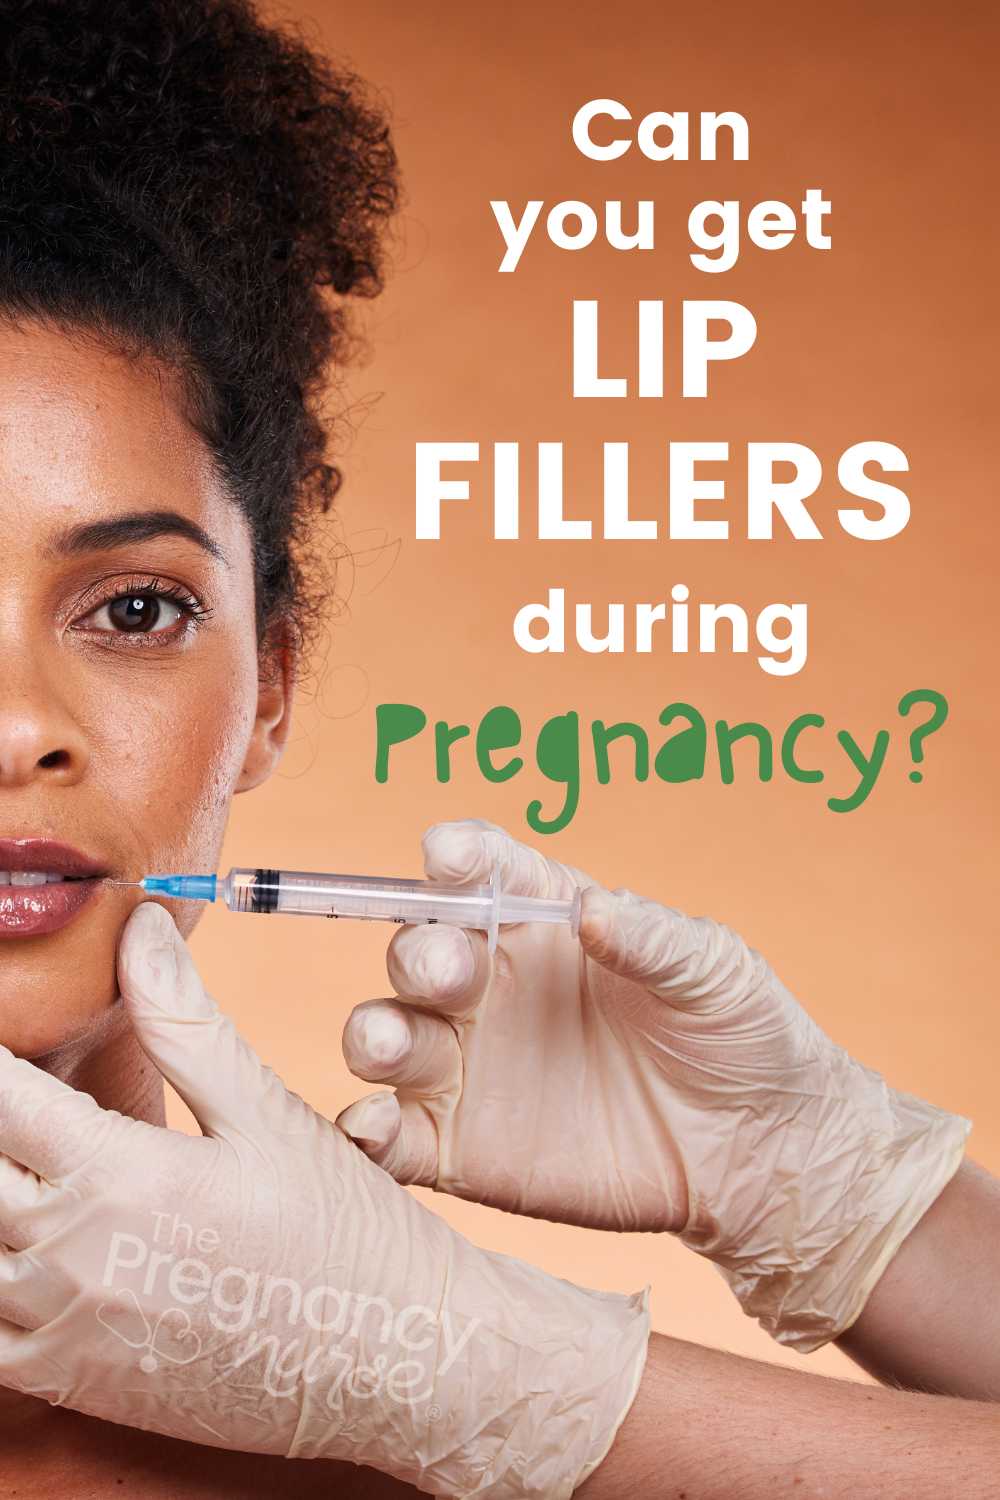 With lip fillers on the rise, many women are wondering if they're safe to get during pregnancy. Here we break down the pros and cons of getting lip fillers while pregnant so you can make an informed decision about what's best for you and your baby.